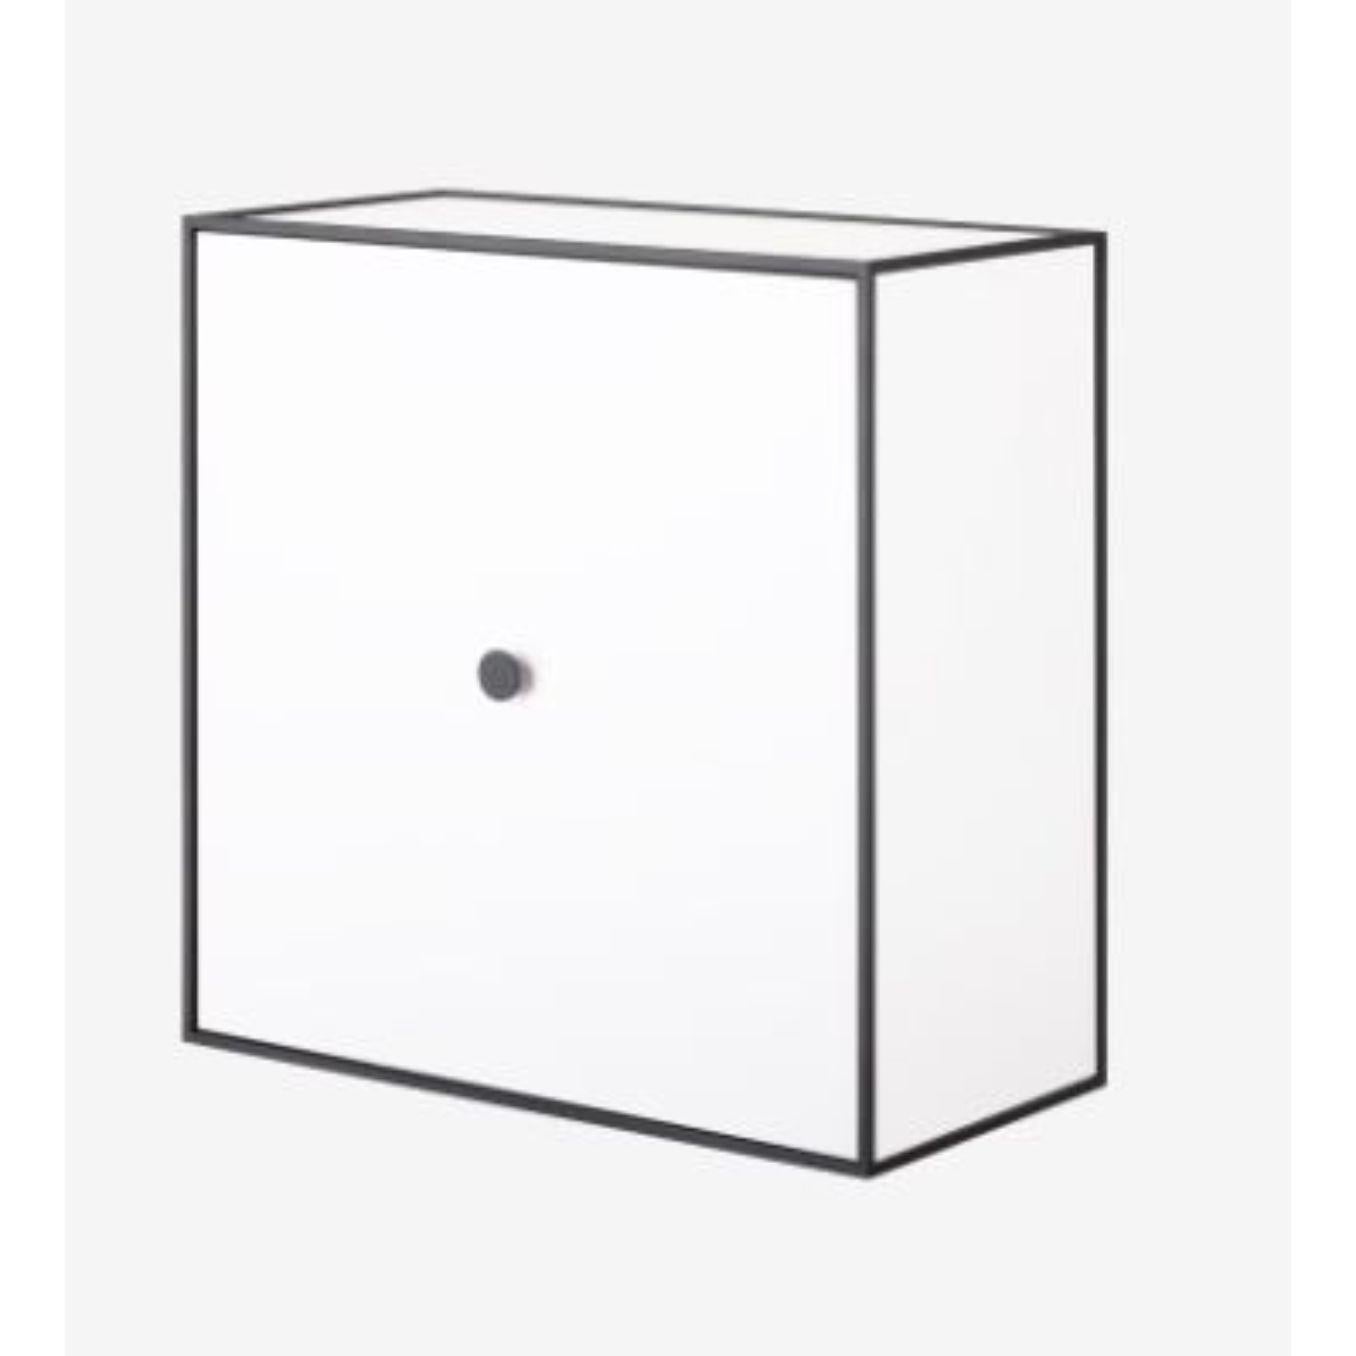 42 white frame box with door by Lassen.
Dimensions: D 42 x W 21 x H 42 cm.
Materials: Finér, Melamin, Melamin, Melamine, Metal, Veneer
Also available in different colours and dimensions.
Weight: 11.50 Kg.

By Lassen is a Danish design brand